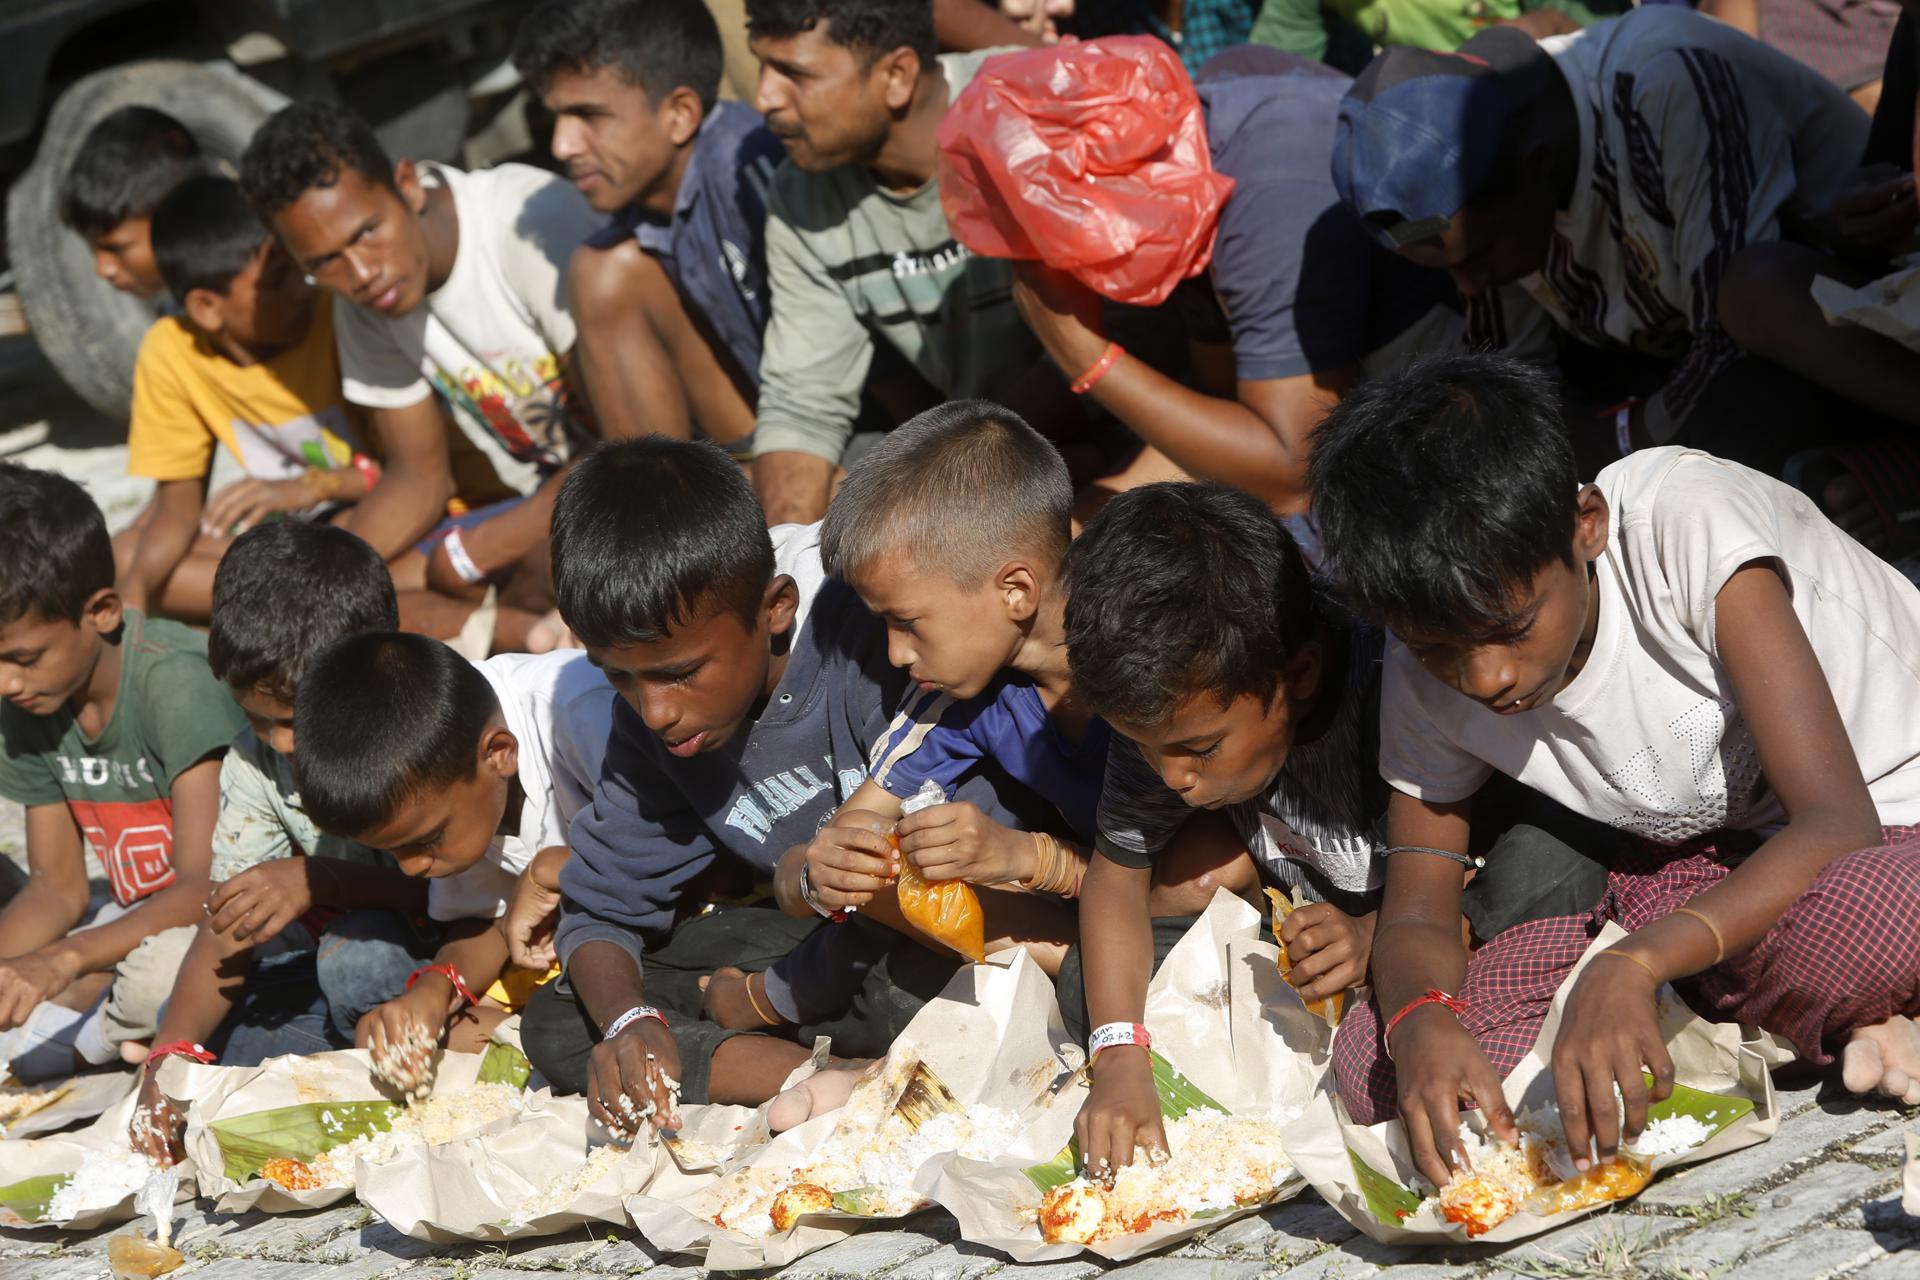 Rohingya refugees have a meal at a temporary shelter provided by the Aceh local government in Ladong, Aceh Besar, Indonesia, 09 January 2023. EFE/EPA/FILE/HOTLI SIMANJUNTAK